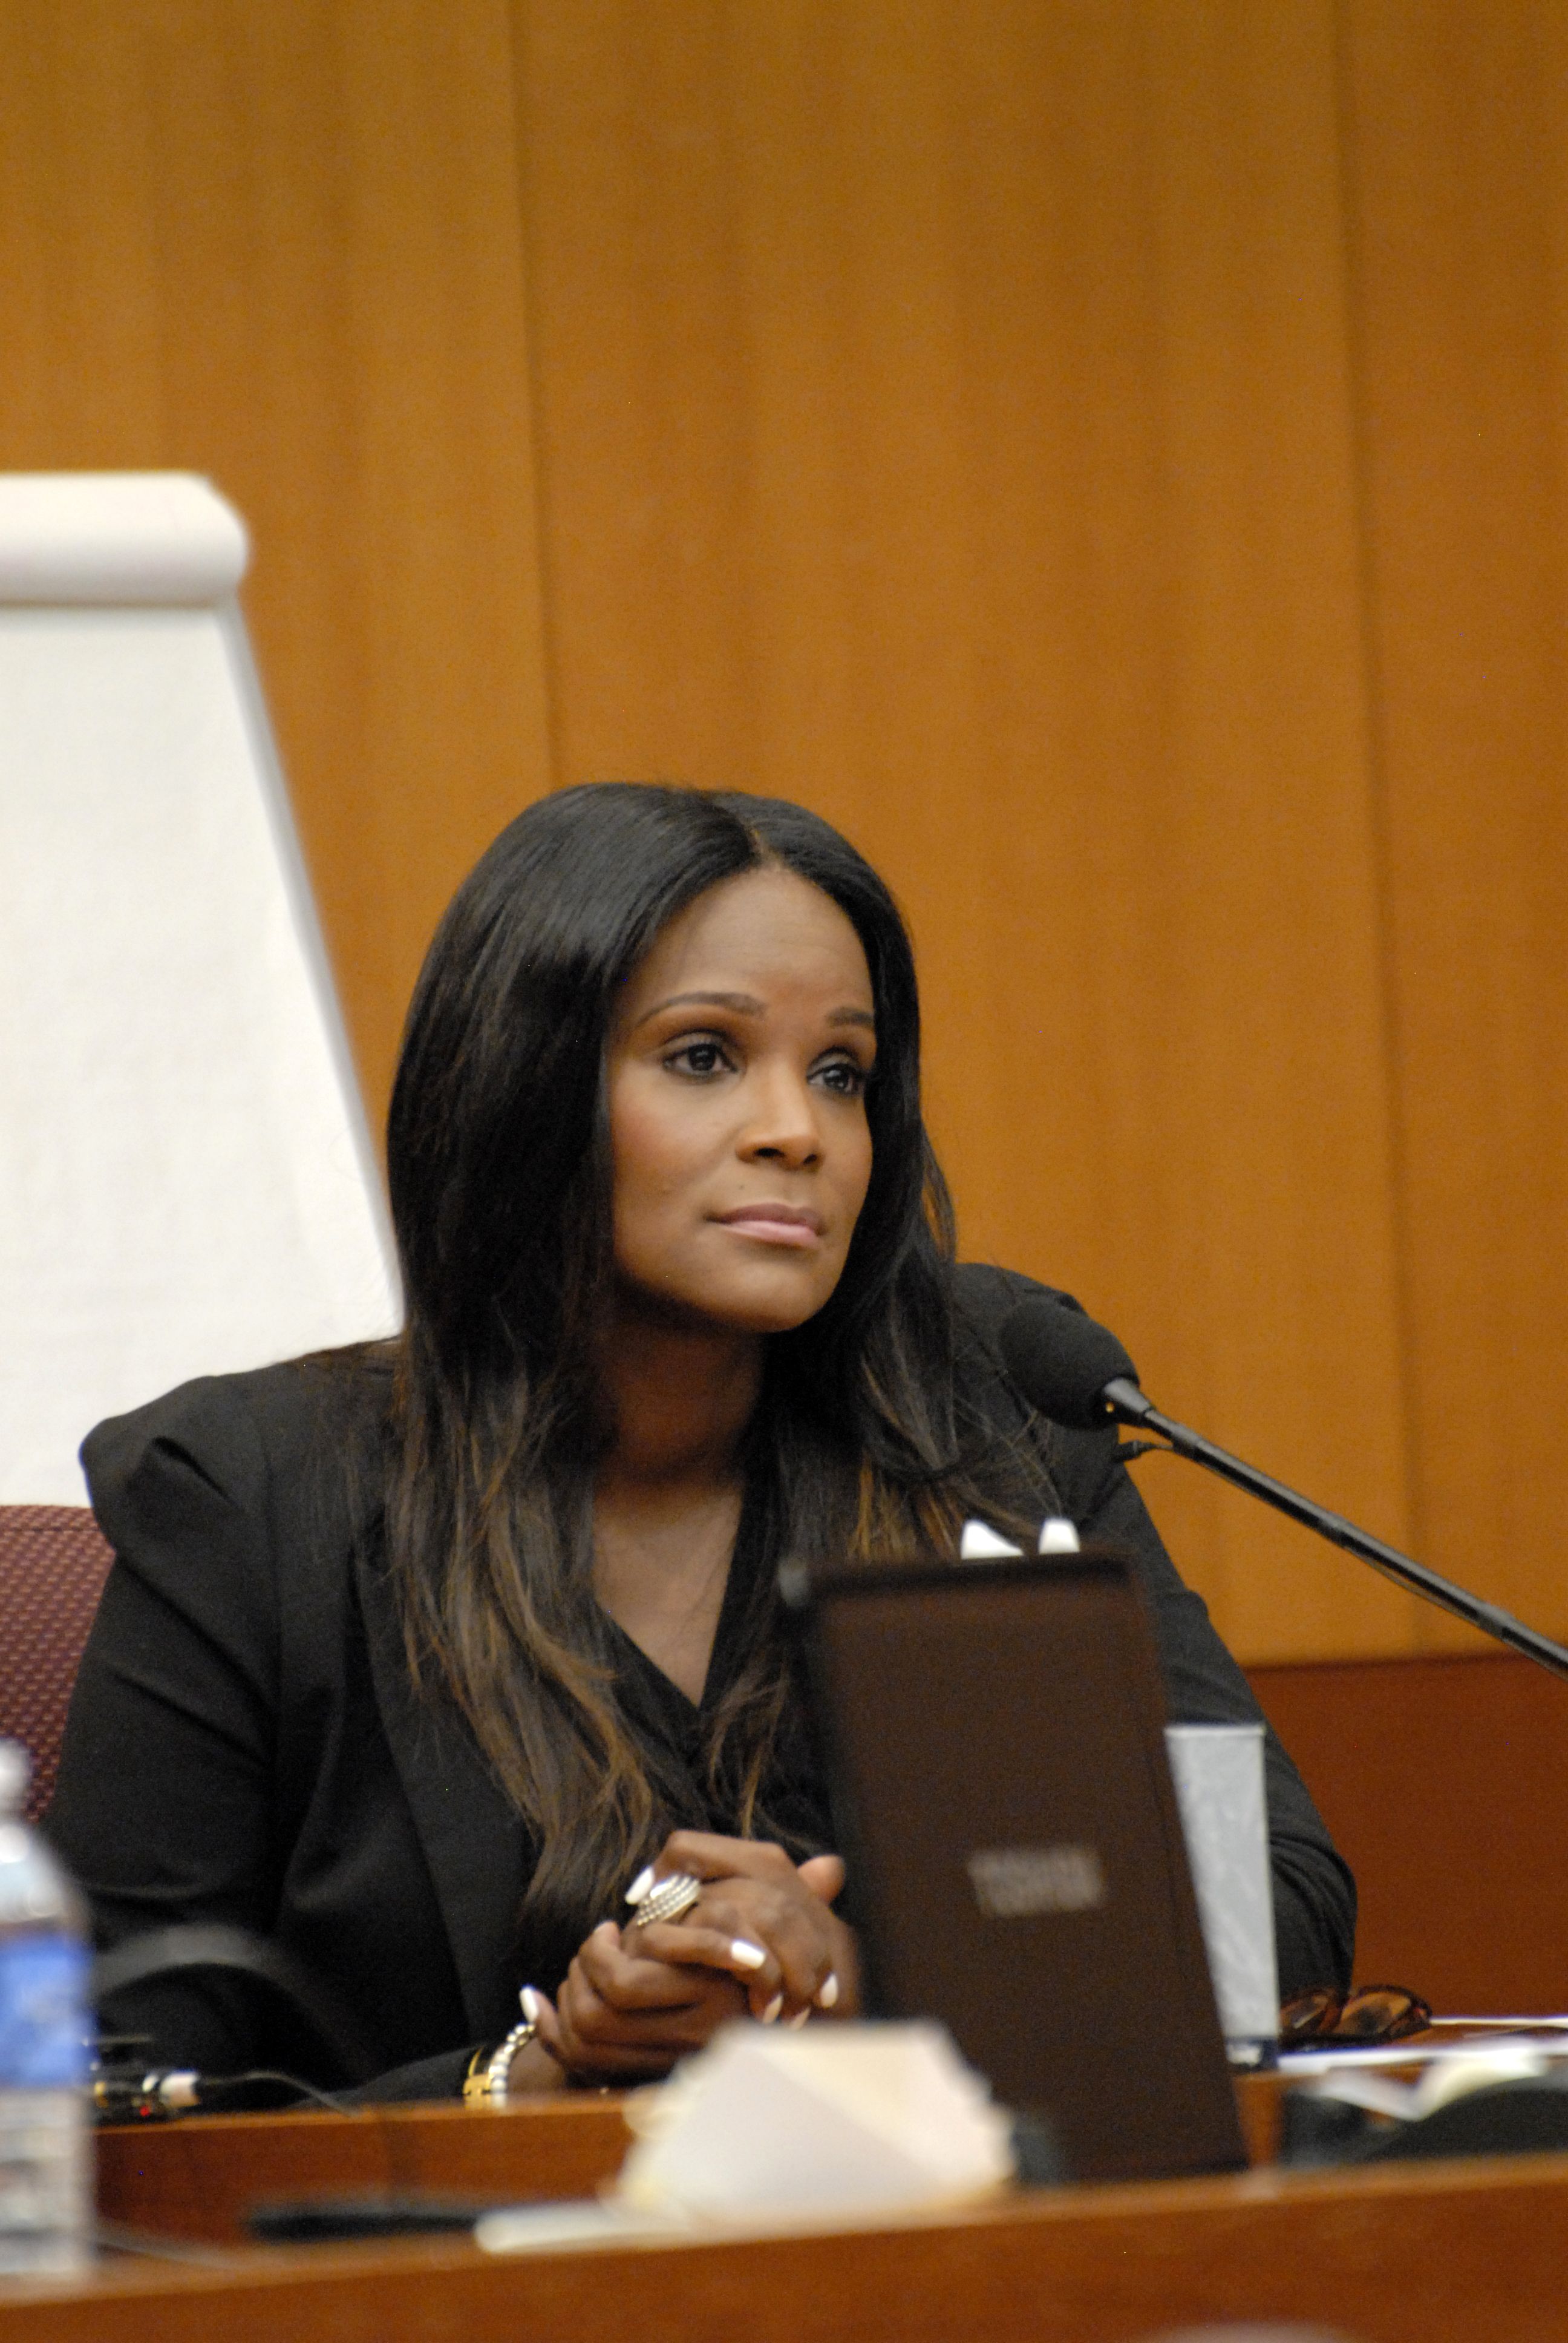 Tameka Foster at the court hearing to discuss child custody at Fulton County State Court on August 14, 2012 in Atlanta, Georgia. | Source: Getty Images